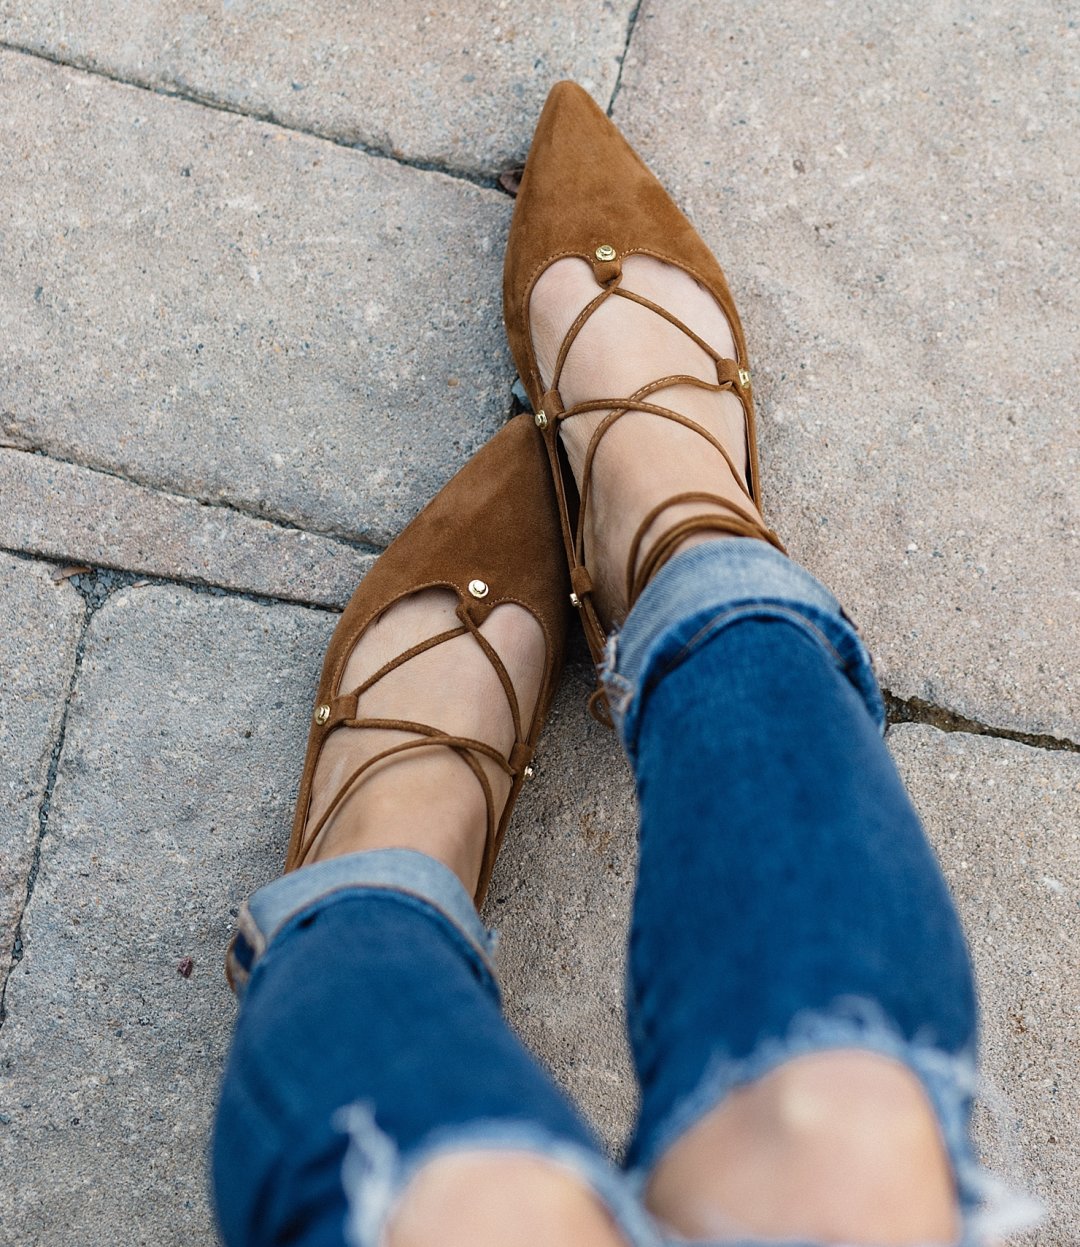 details from brightontheday casual fall outfit - cognac suede lace up flats, comfy fall brown flats, lace up shoe trend, distressed jeans rolled up and lace up flats